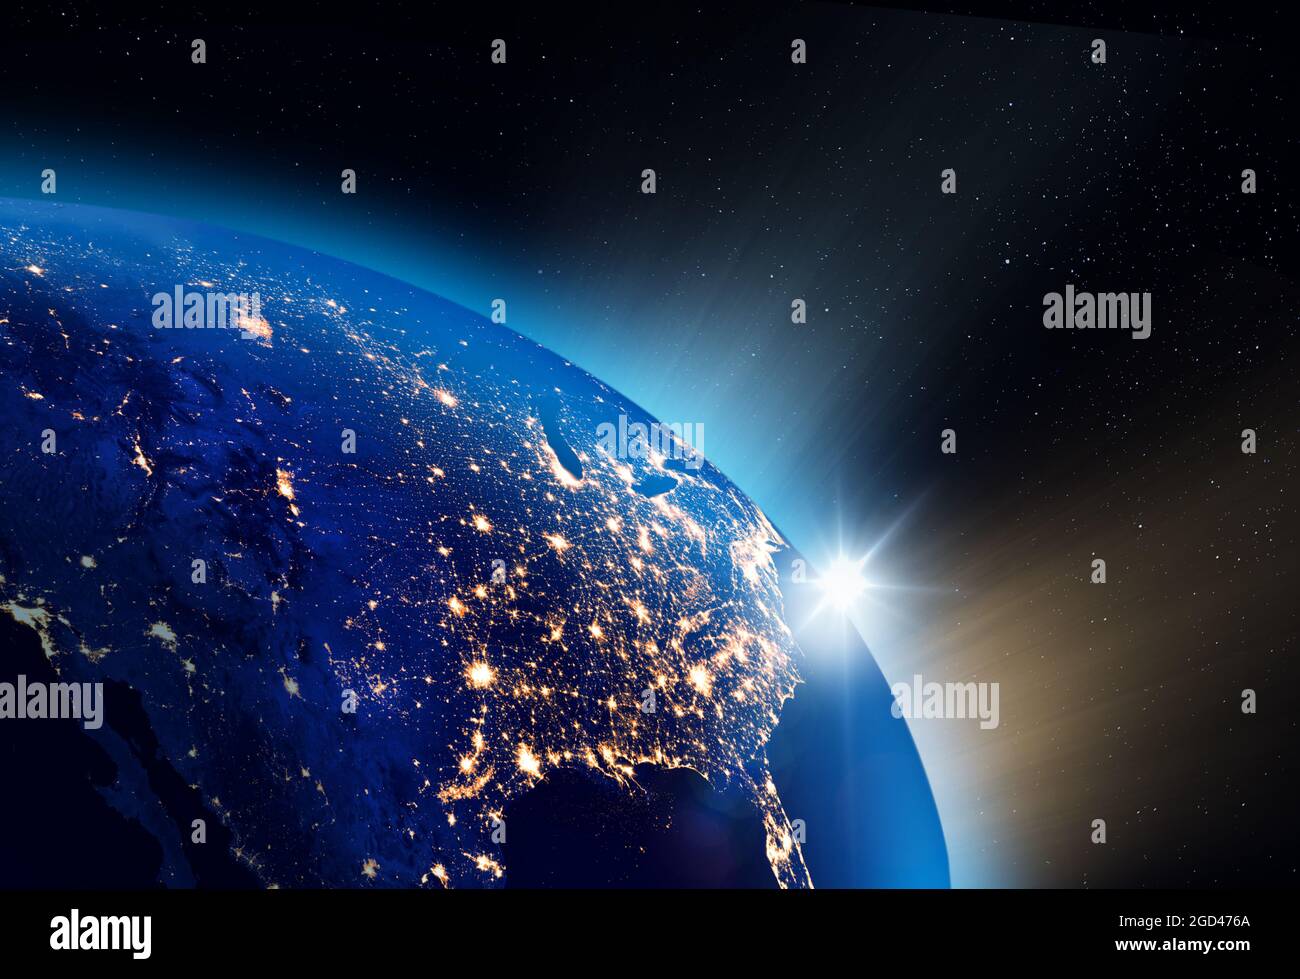 Illustration of the sunrise over Planet Earth, North America city lights visible. Digital communication concept. Some elements of the image furnished Stock Photo